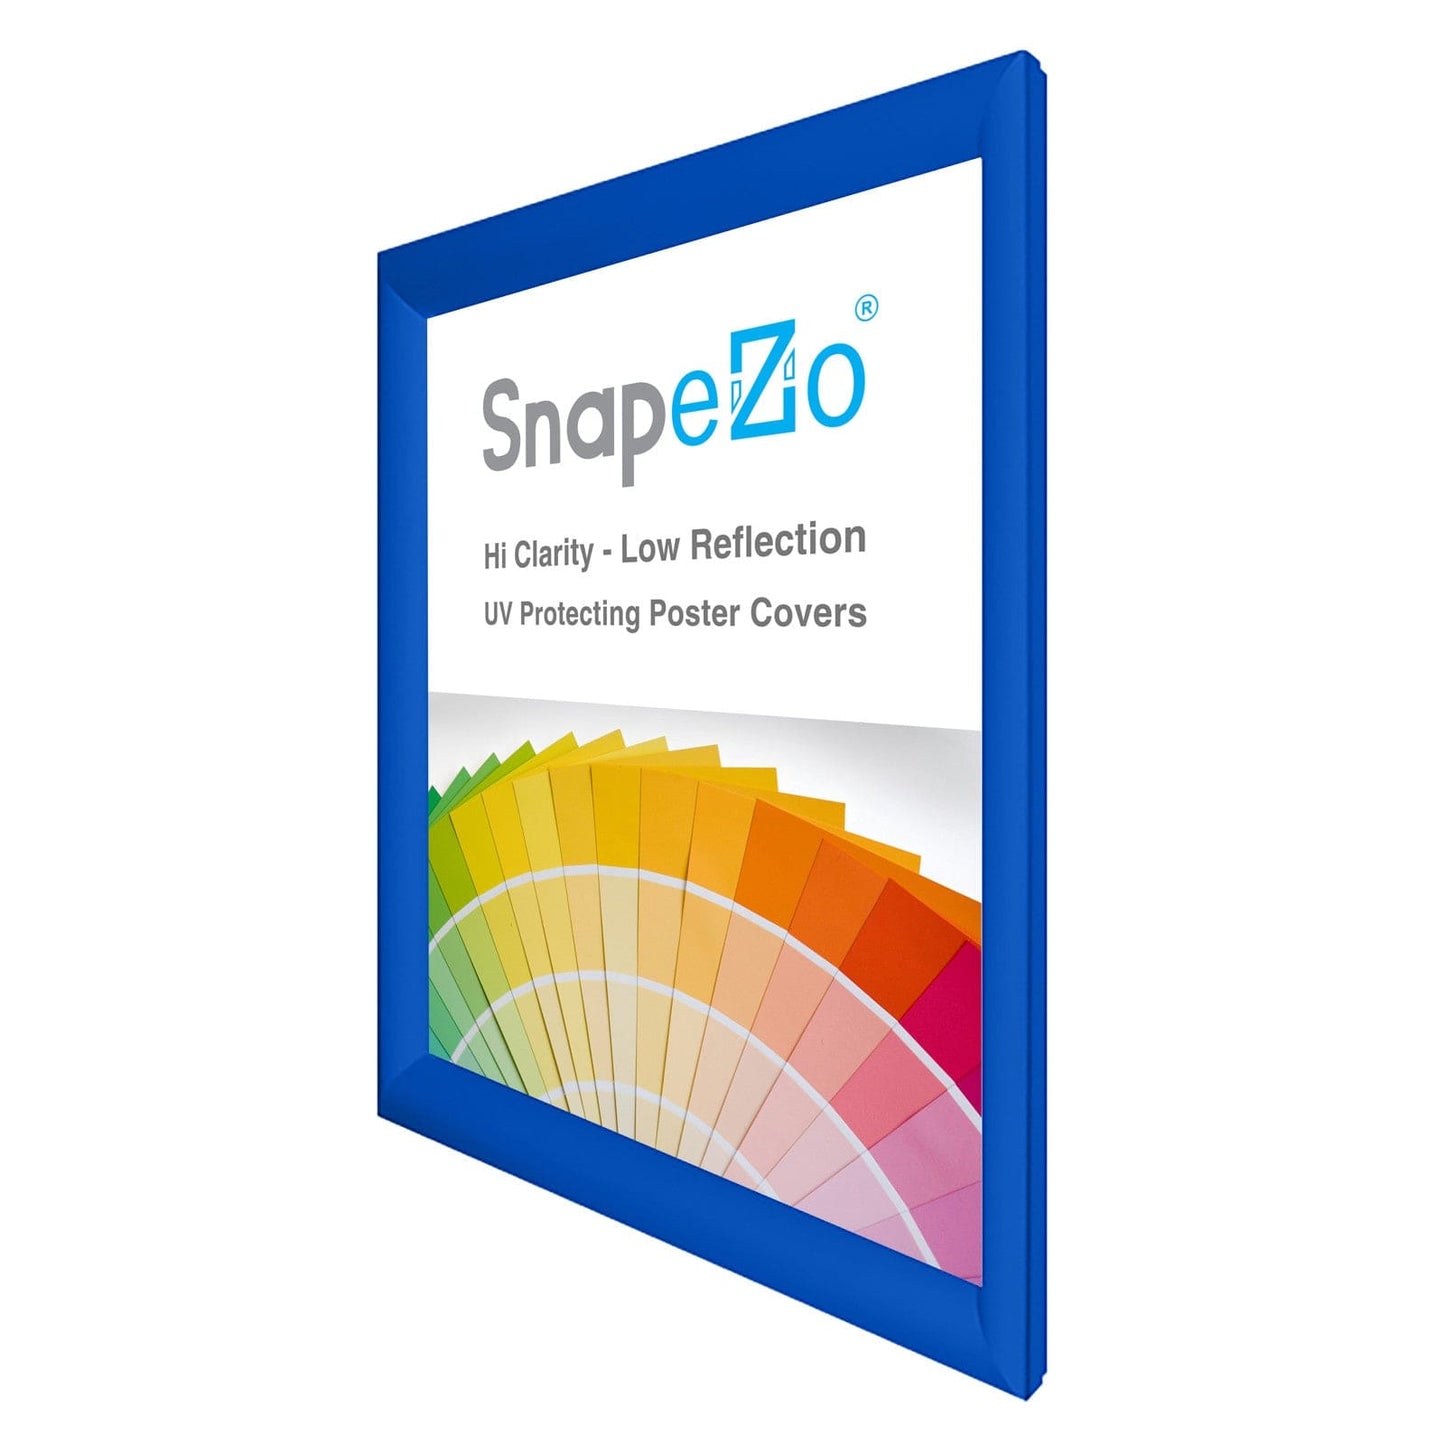 23x31 Blue SnapeZo® Snap Frame - 1.2" Profile - Snap Frames Direct